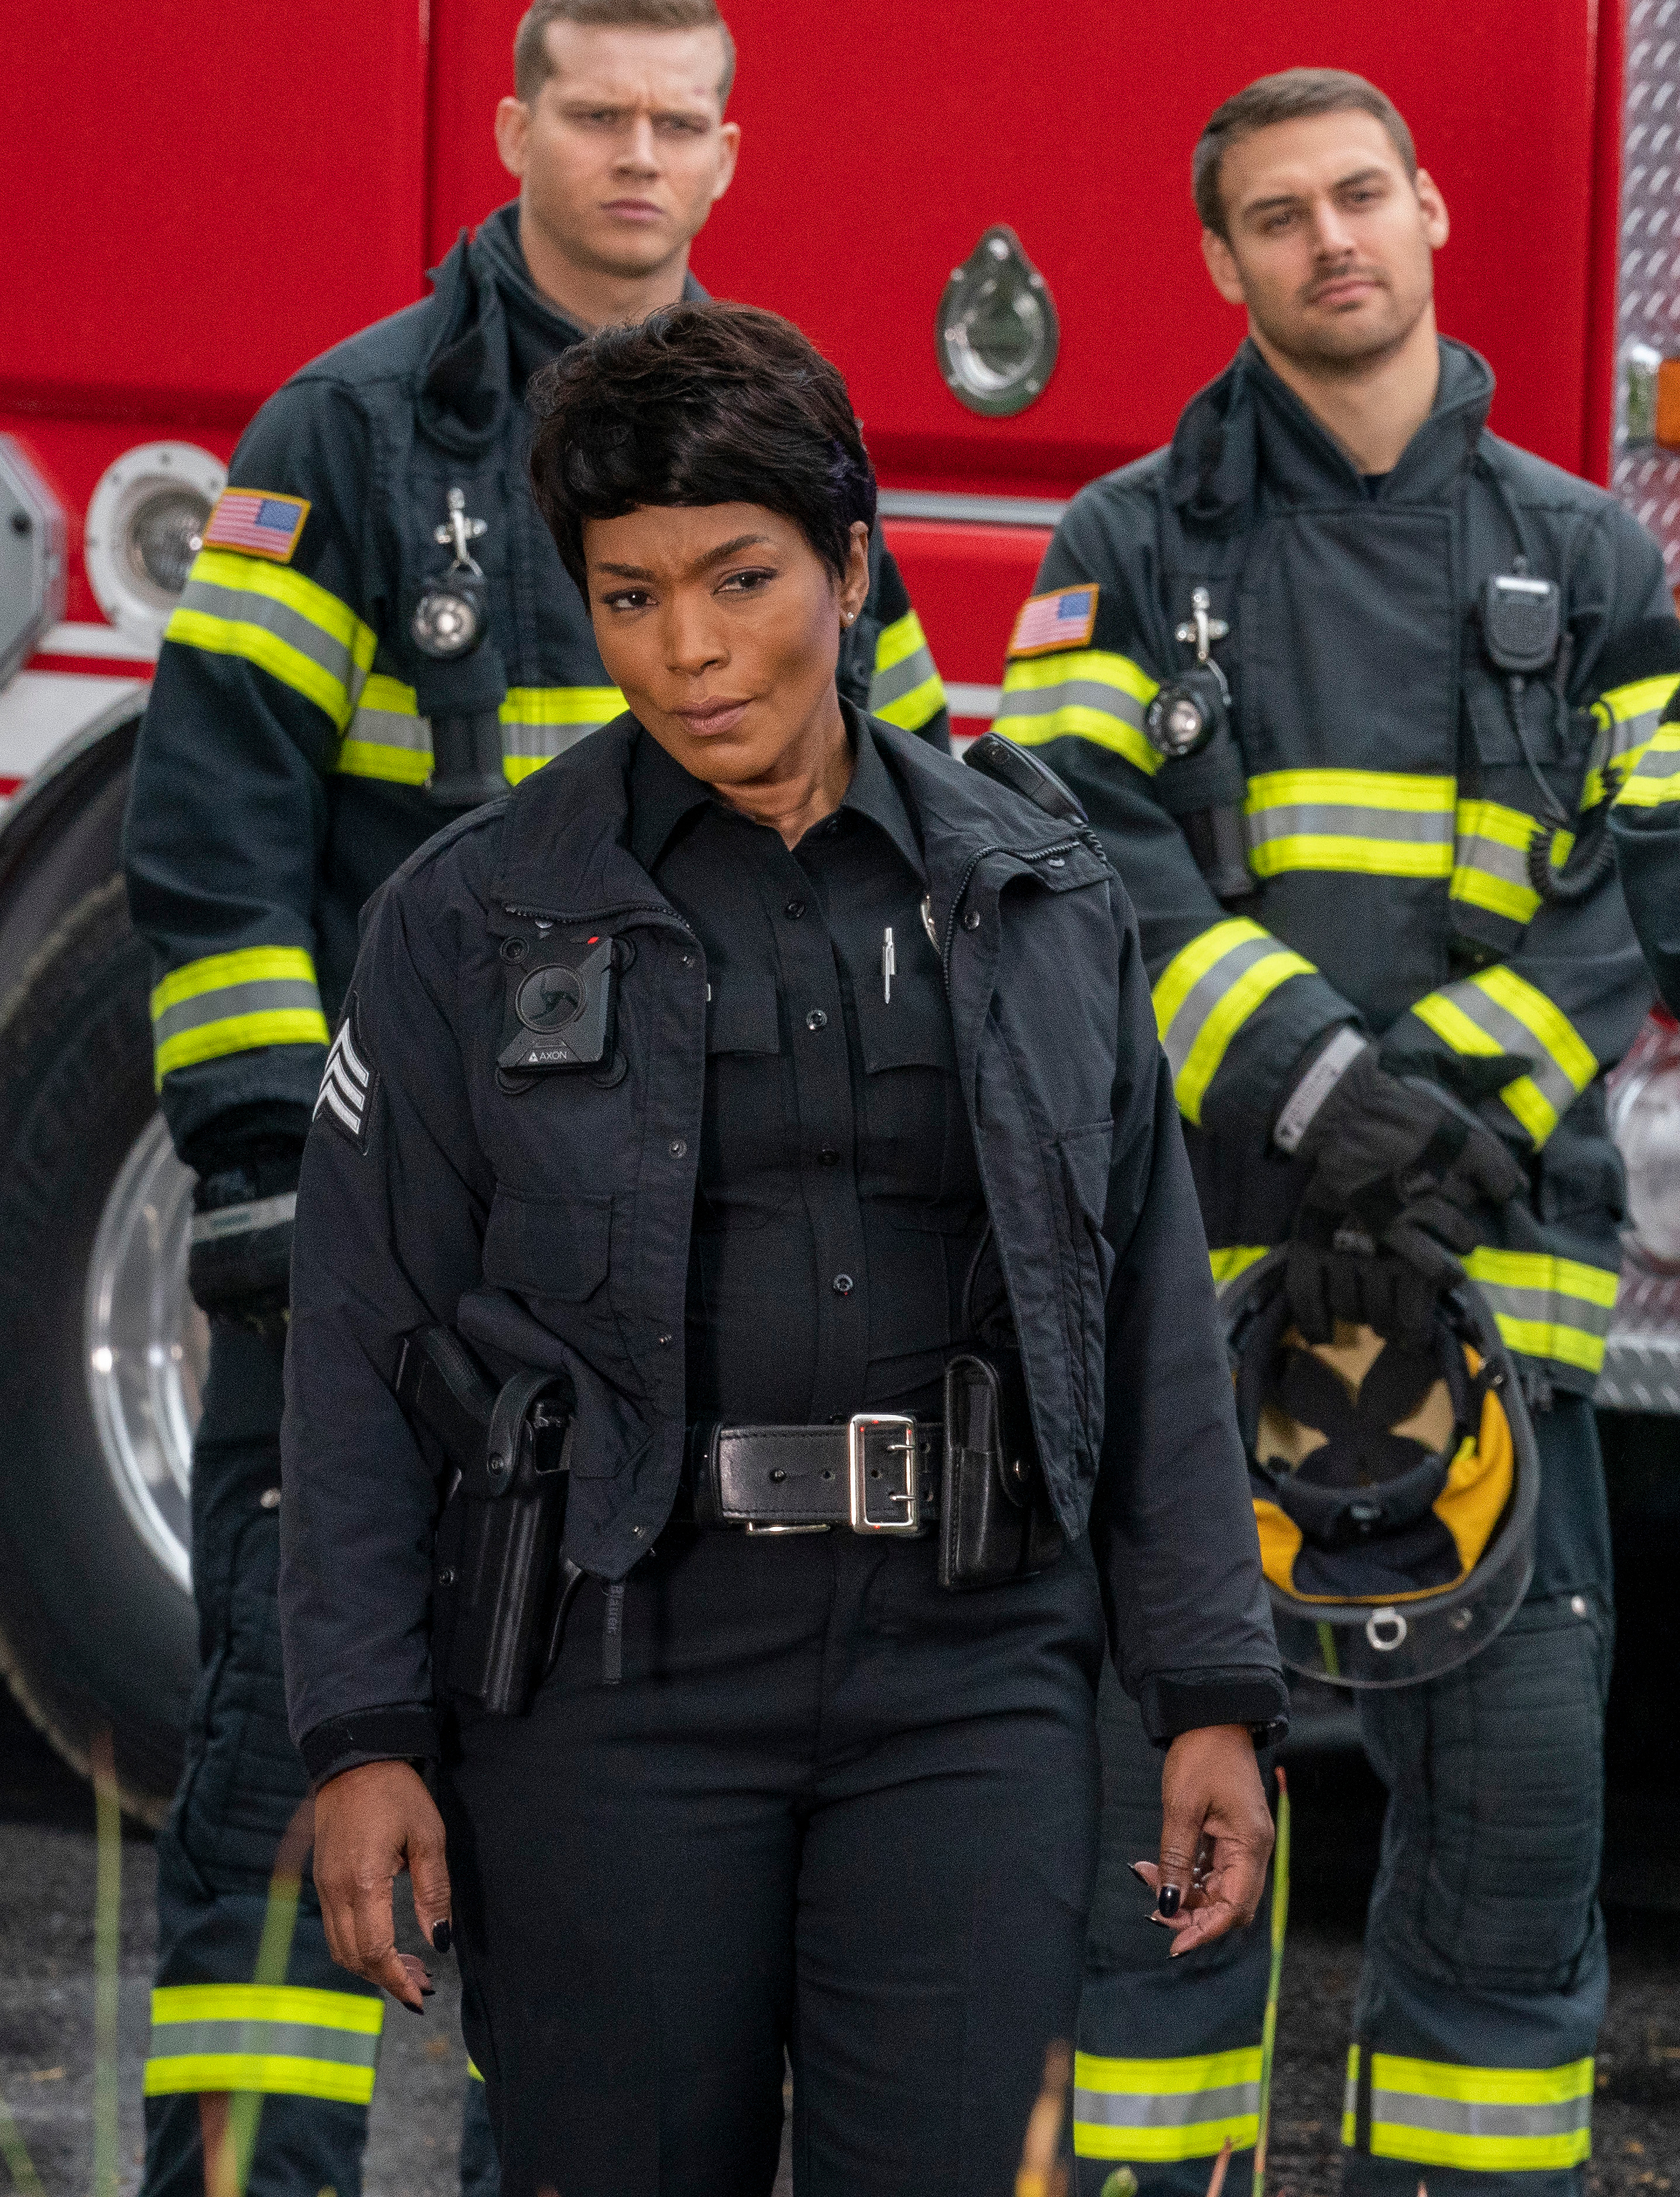 Oliver Stark, Angela Bassett and Ryan Guzman during an episode of "9-1-1." | Source: Getty Images